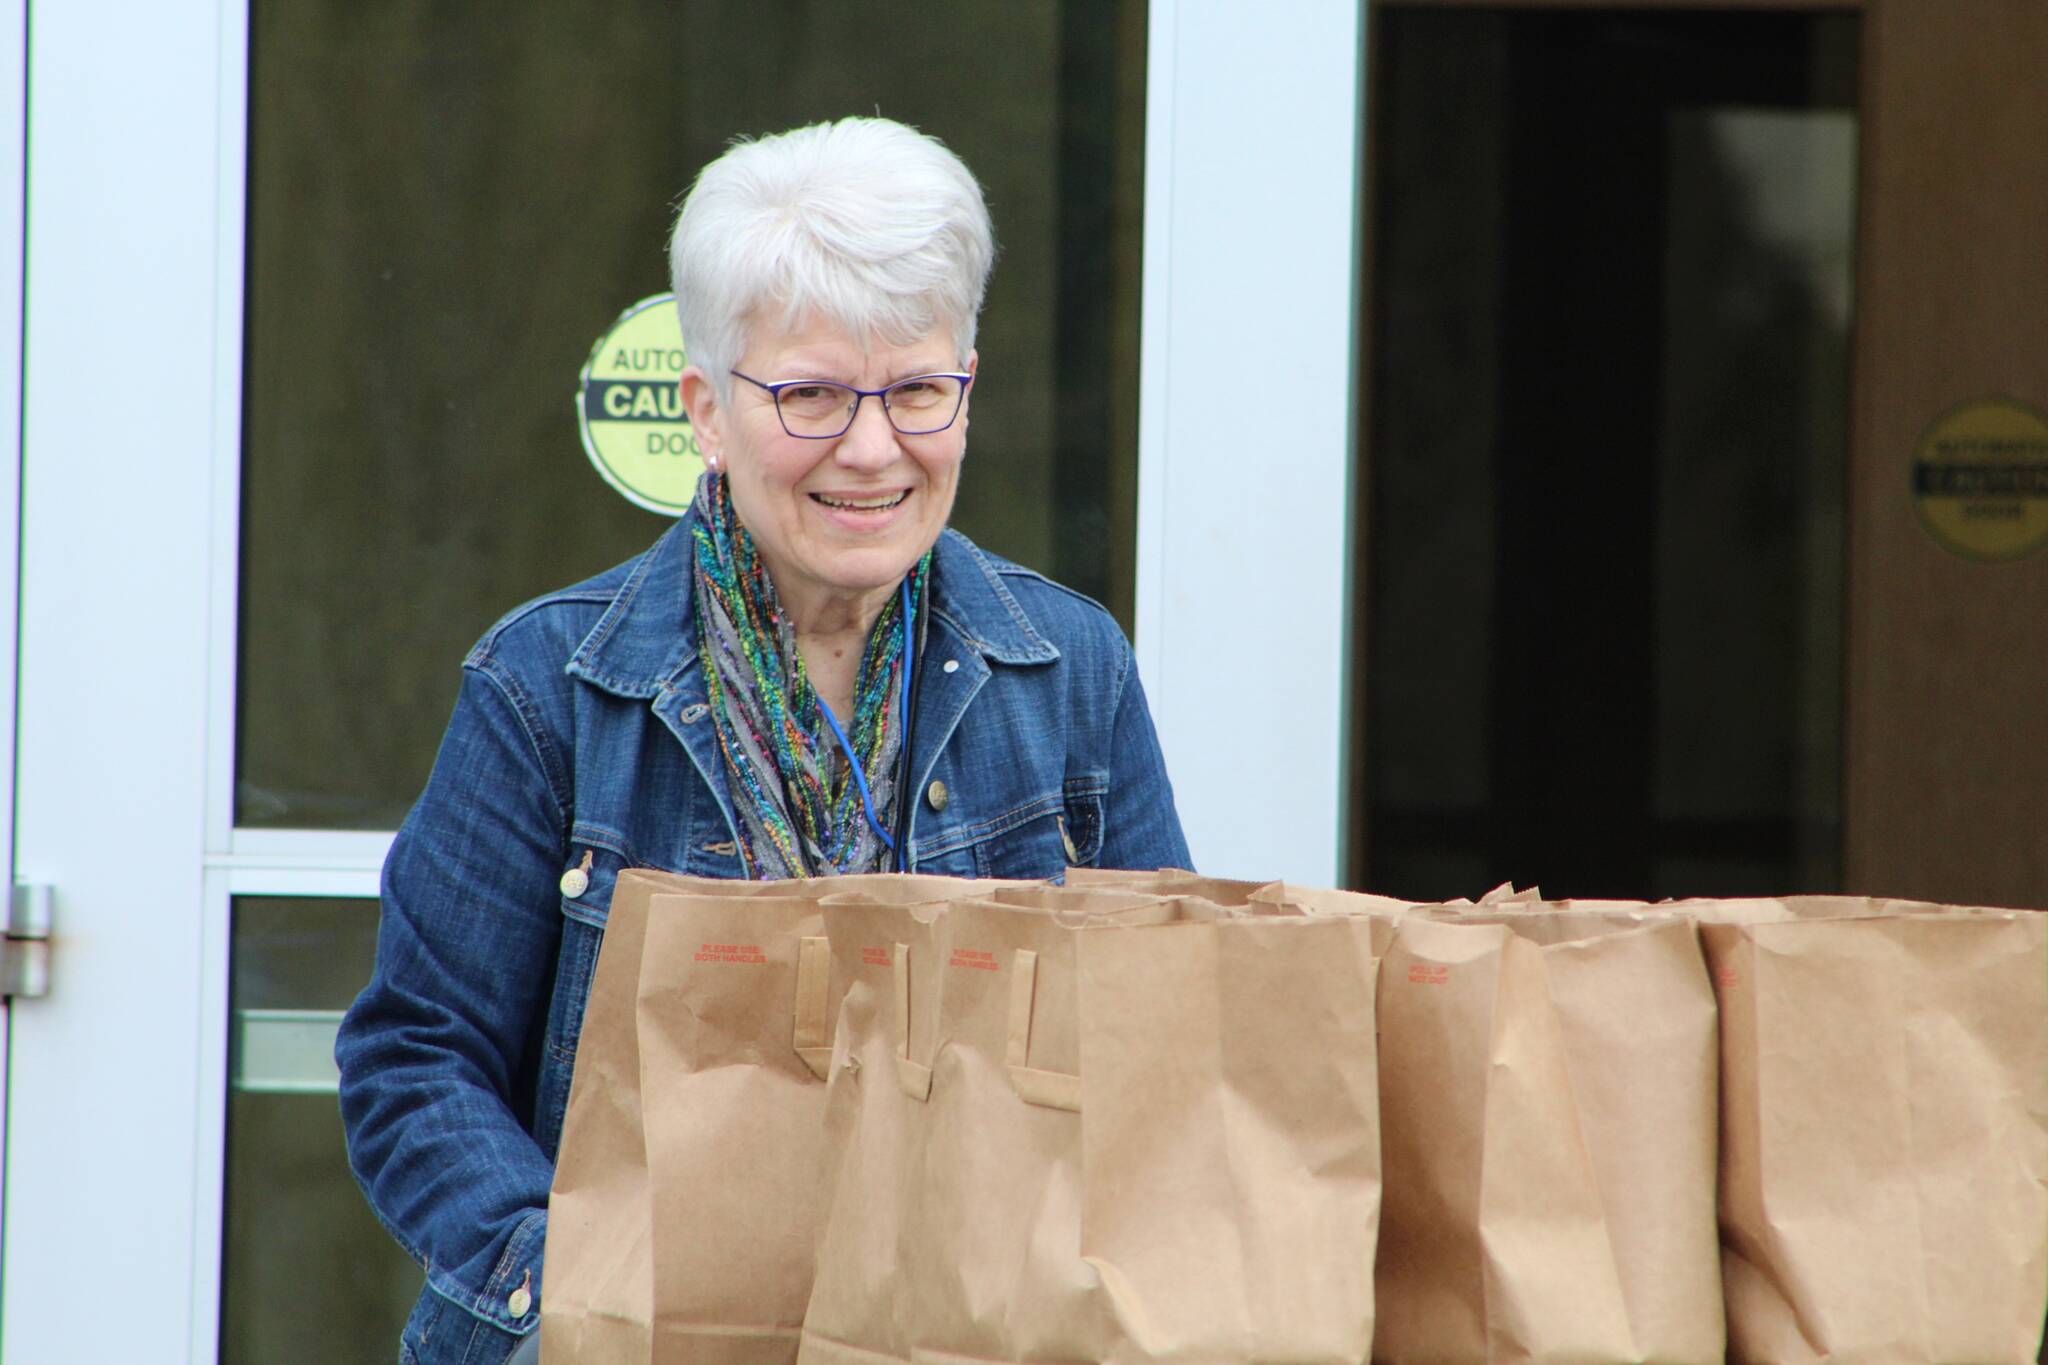 Photo by Alex Bruell/the Mirror
Meals on Wheels volunteer Connie Hanser loads meals from the Federal Way Community Center into her car for delivery to individuals in Federal Way on April 20. A former social worker, Hanser joined the program so that she could remain helpful in her community after retiring.